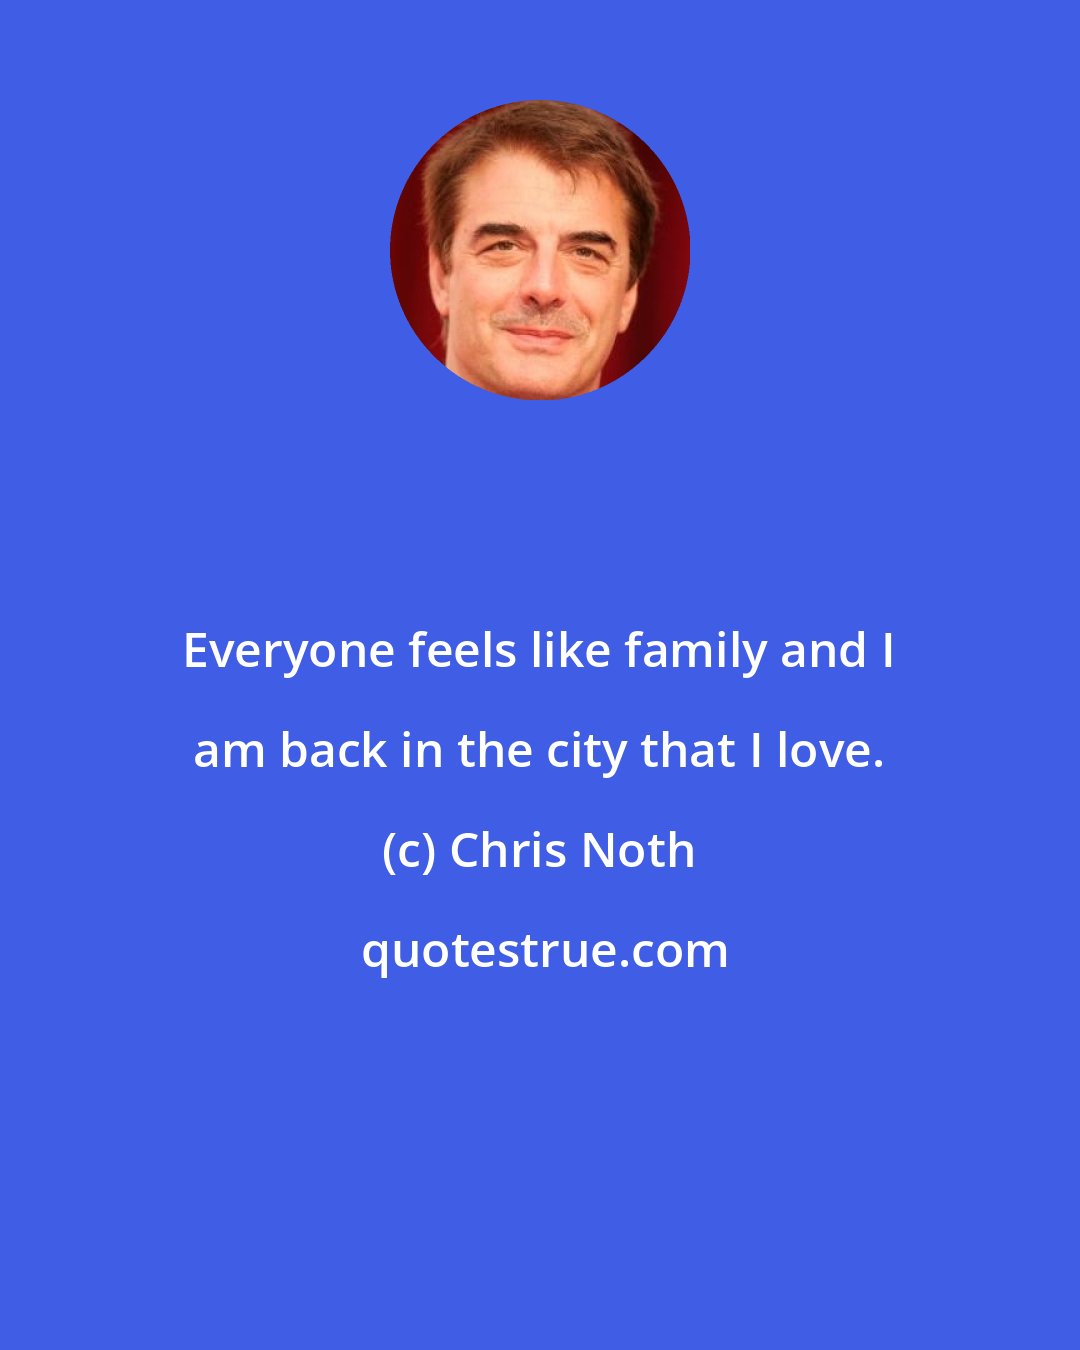 Chris Noth: Everyone feels like family and I am back in the city that I love.